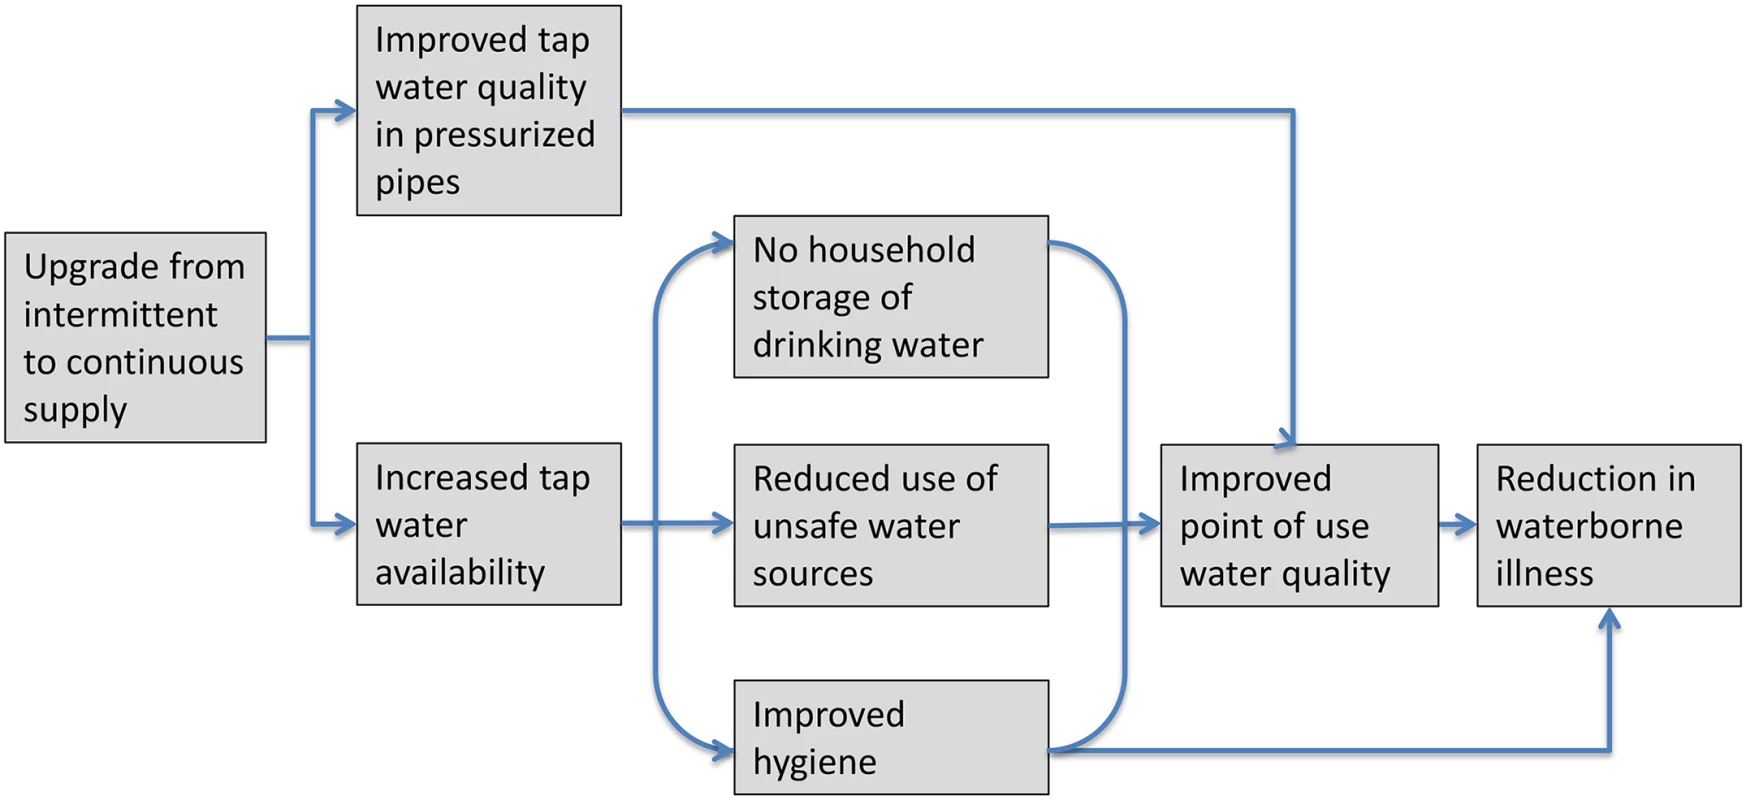 Causal chain between upgrading from intermittent to continuous water supply and reduction in waterborne illness.